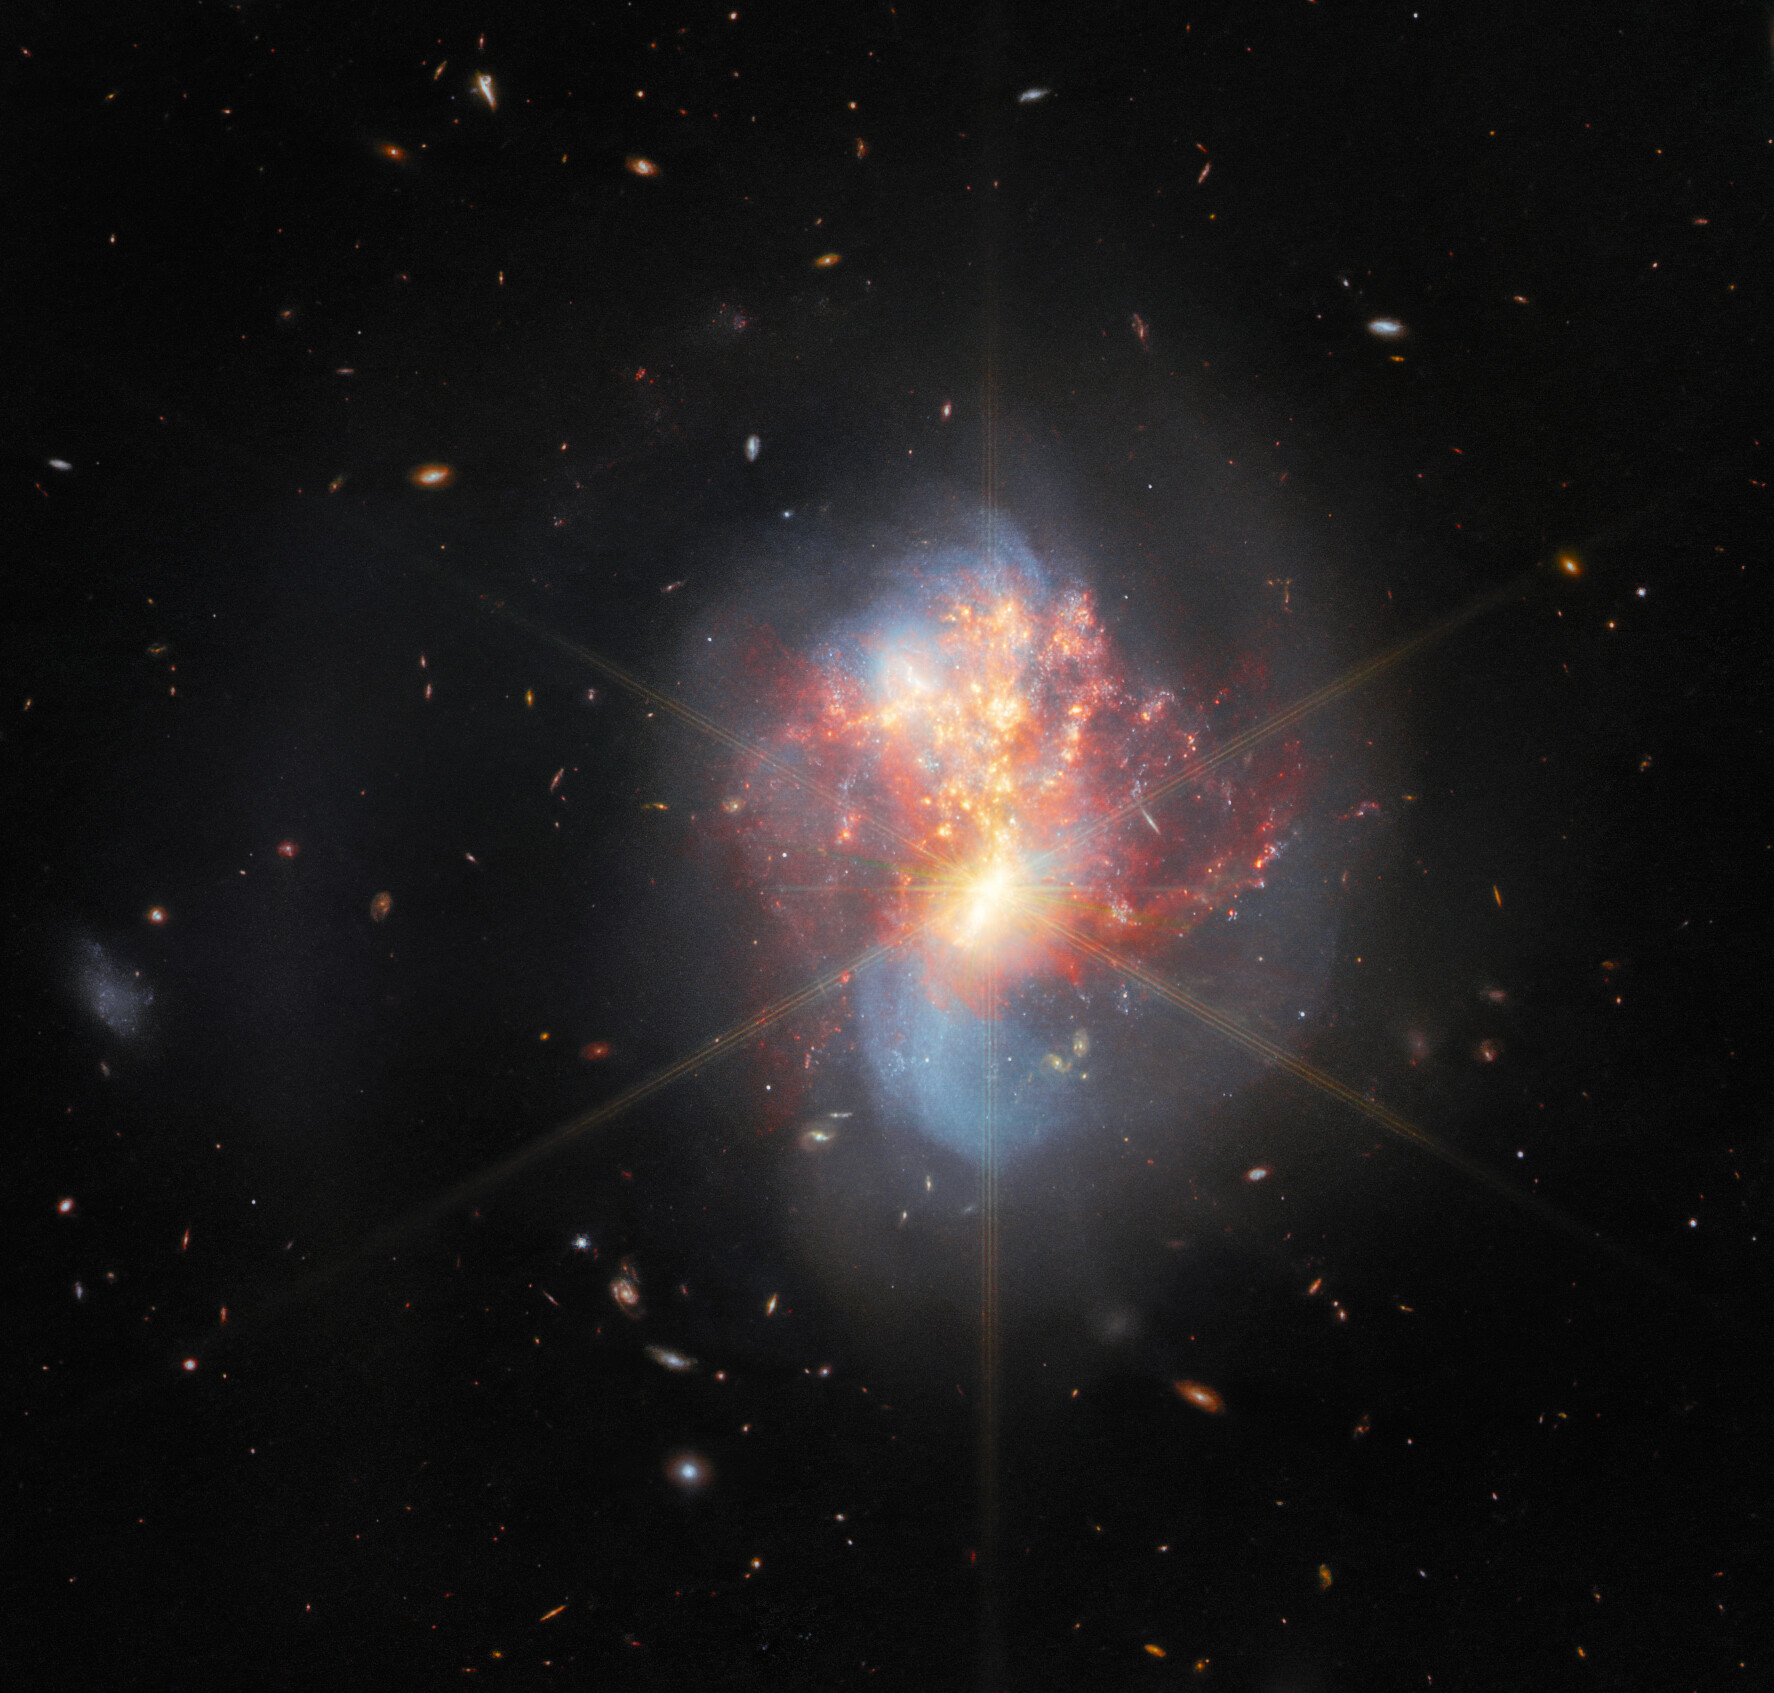 Merging galaxies with a black hole center